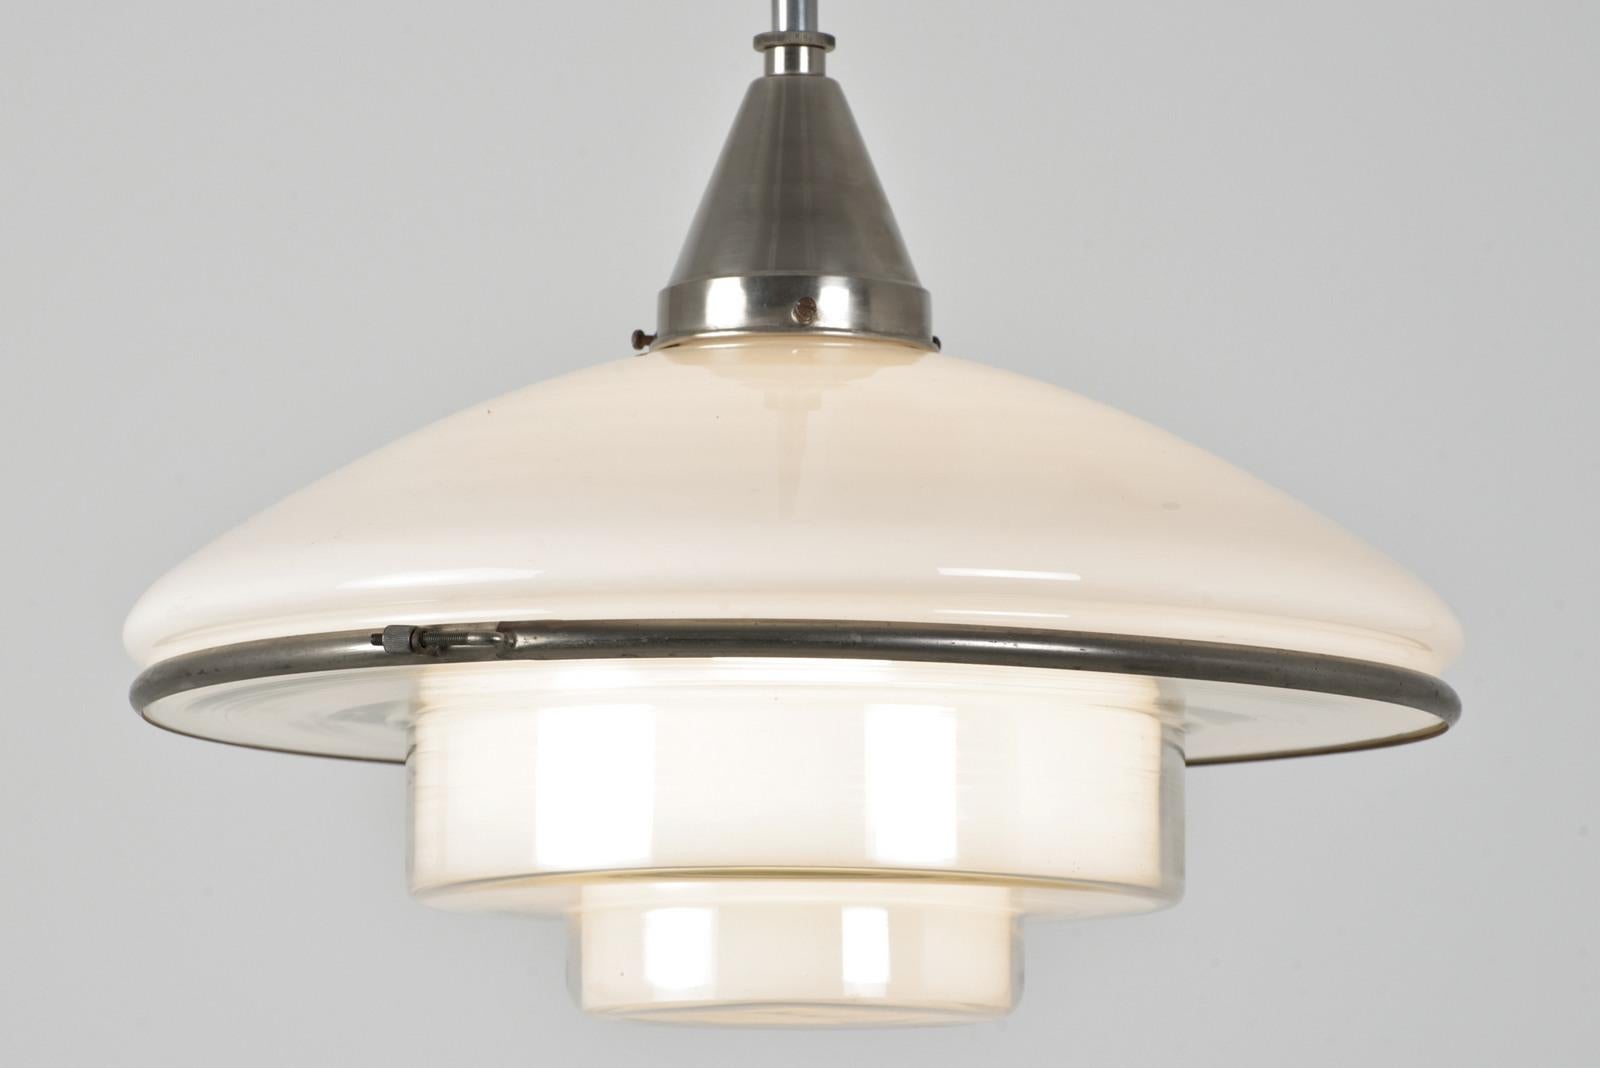 Pendant Lamp by C. F. Otto Müller for SISTRAH, Germany - 1931 For Sale 4